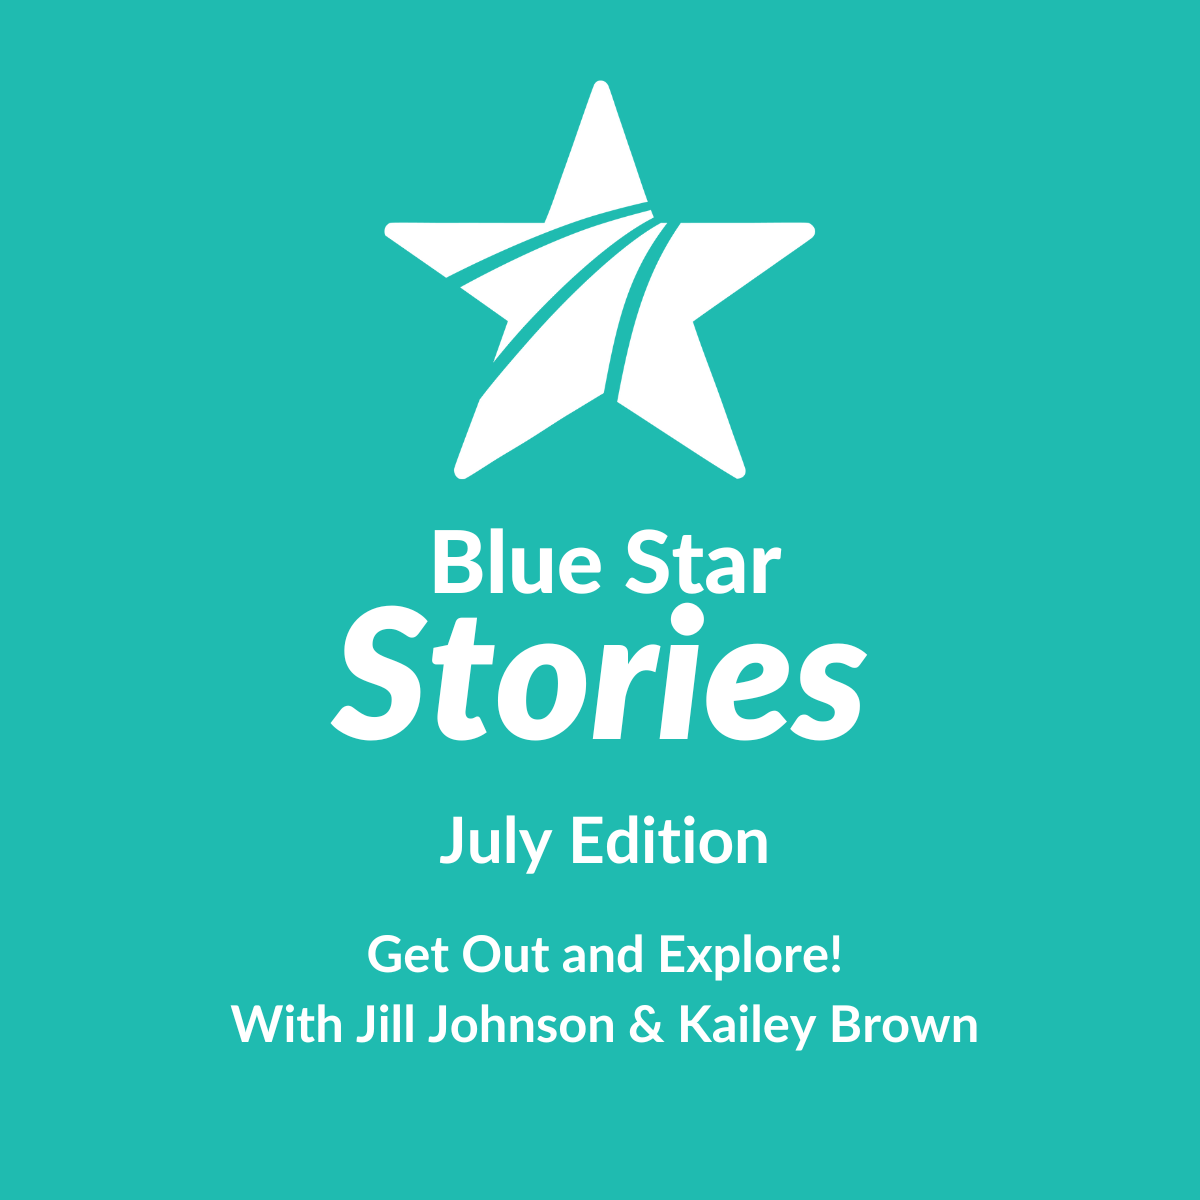 Listen to the podcast: Blue Star Stories - July Edition - Get Out and Explore! With Jill Johnson & Kailey Brown